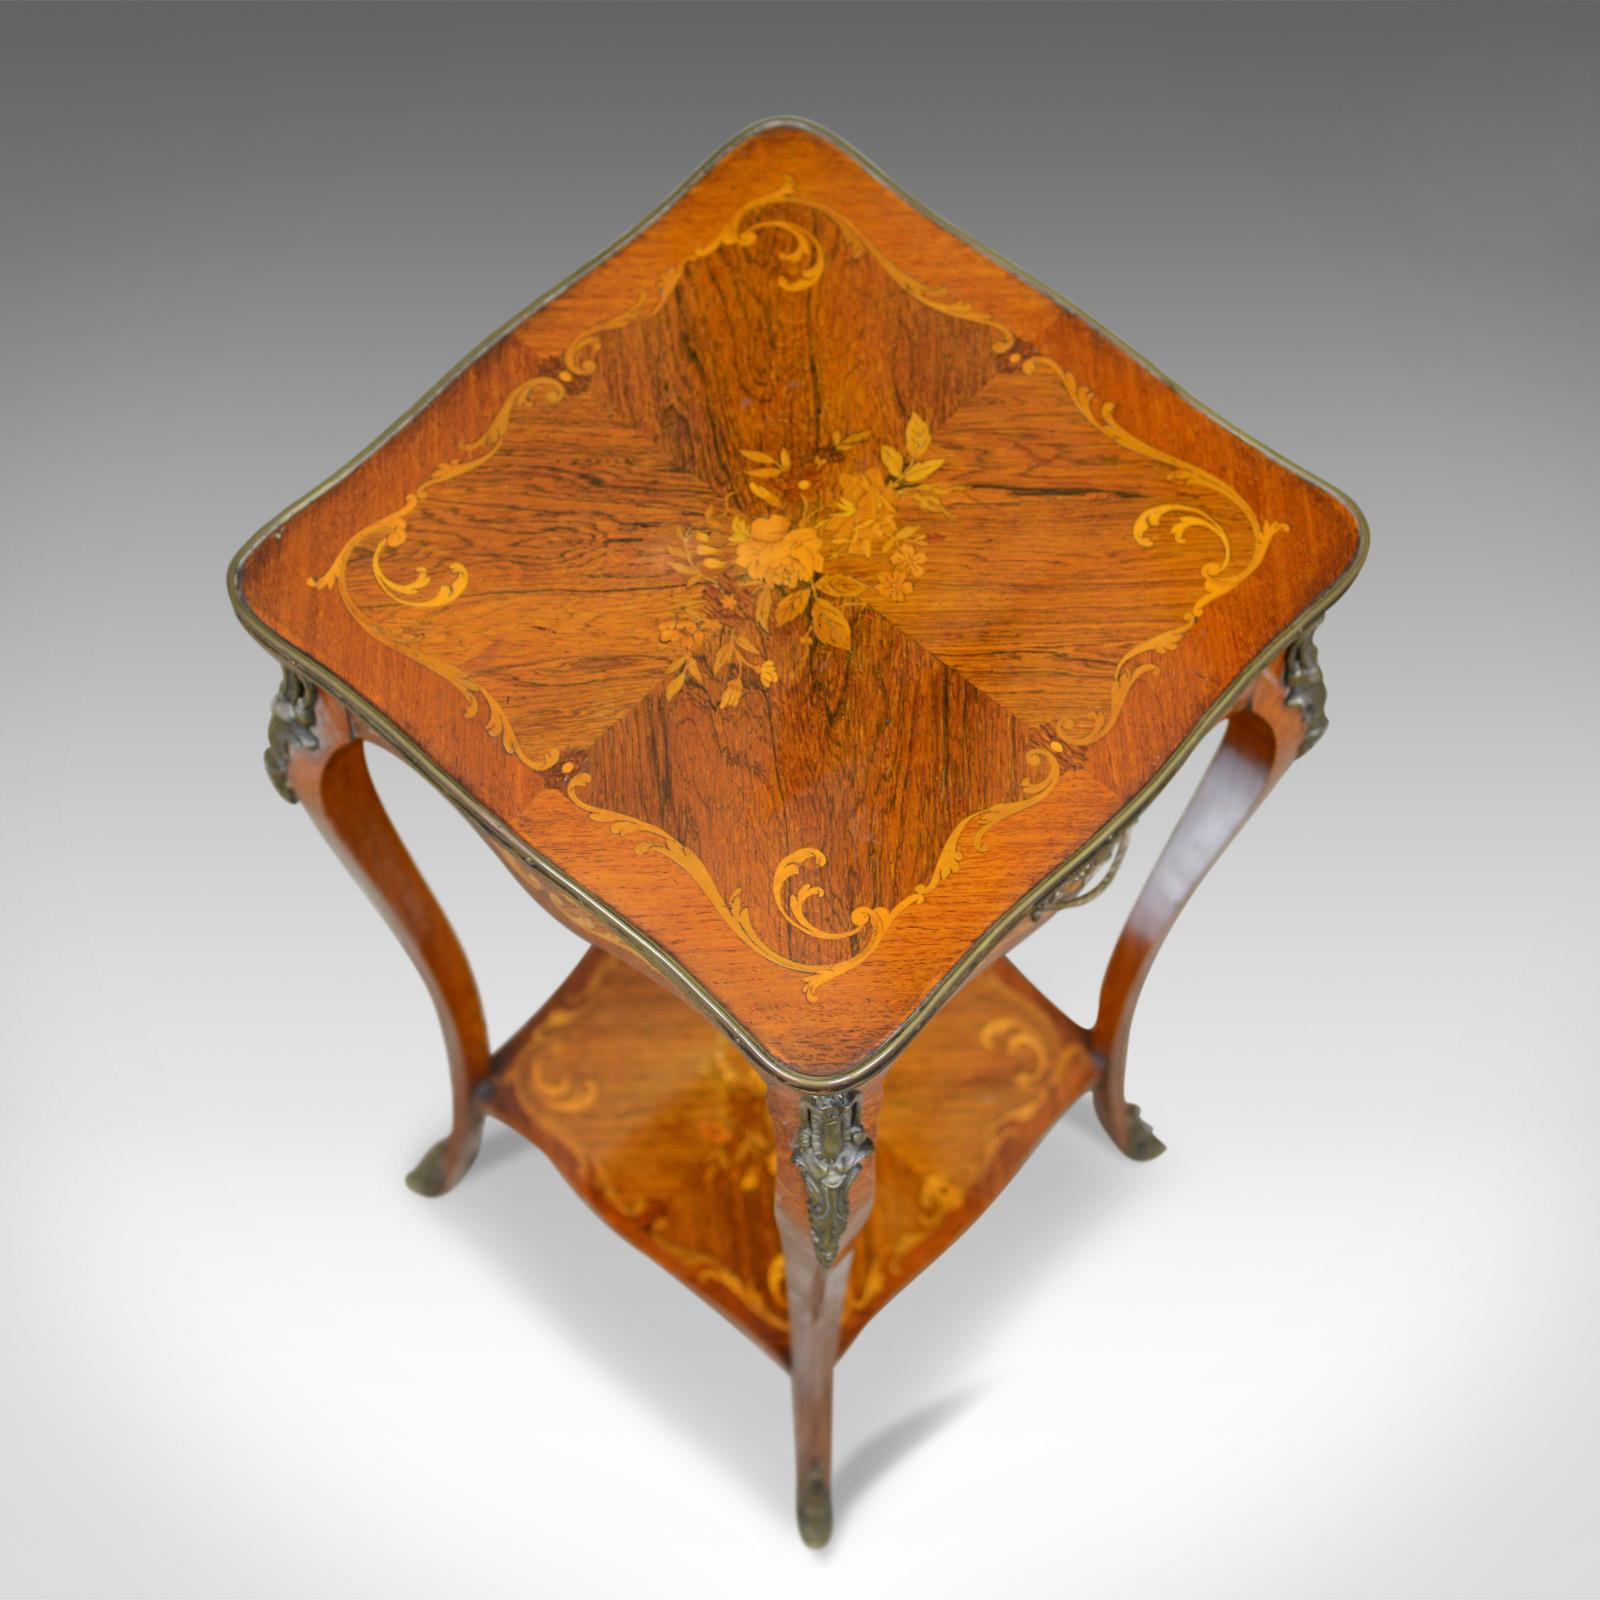 Victorian French Antique Étagère, Kingwood Side Table, Nightstand, Druce & Co., circa 1870